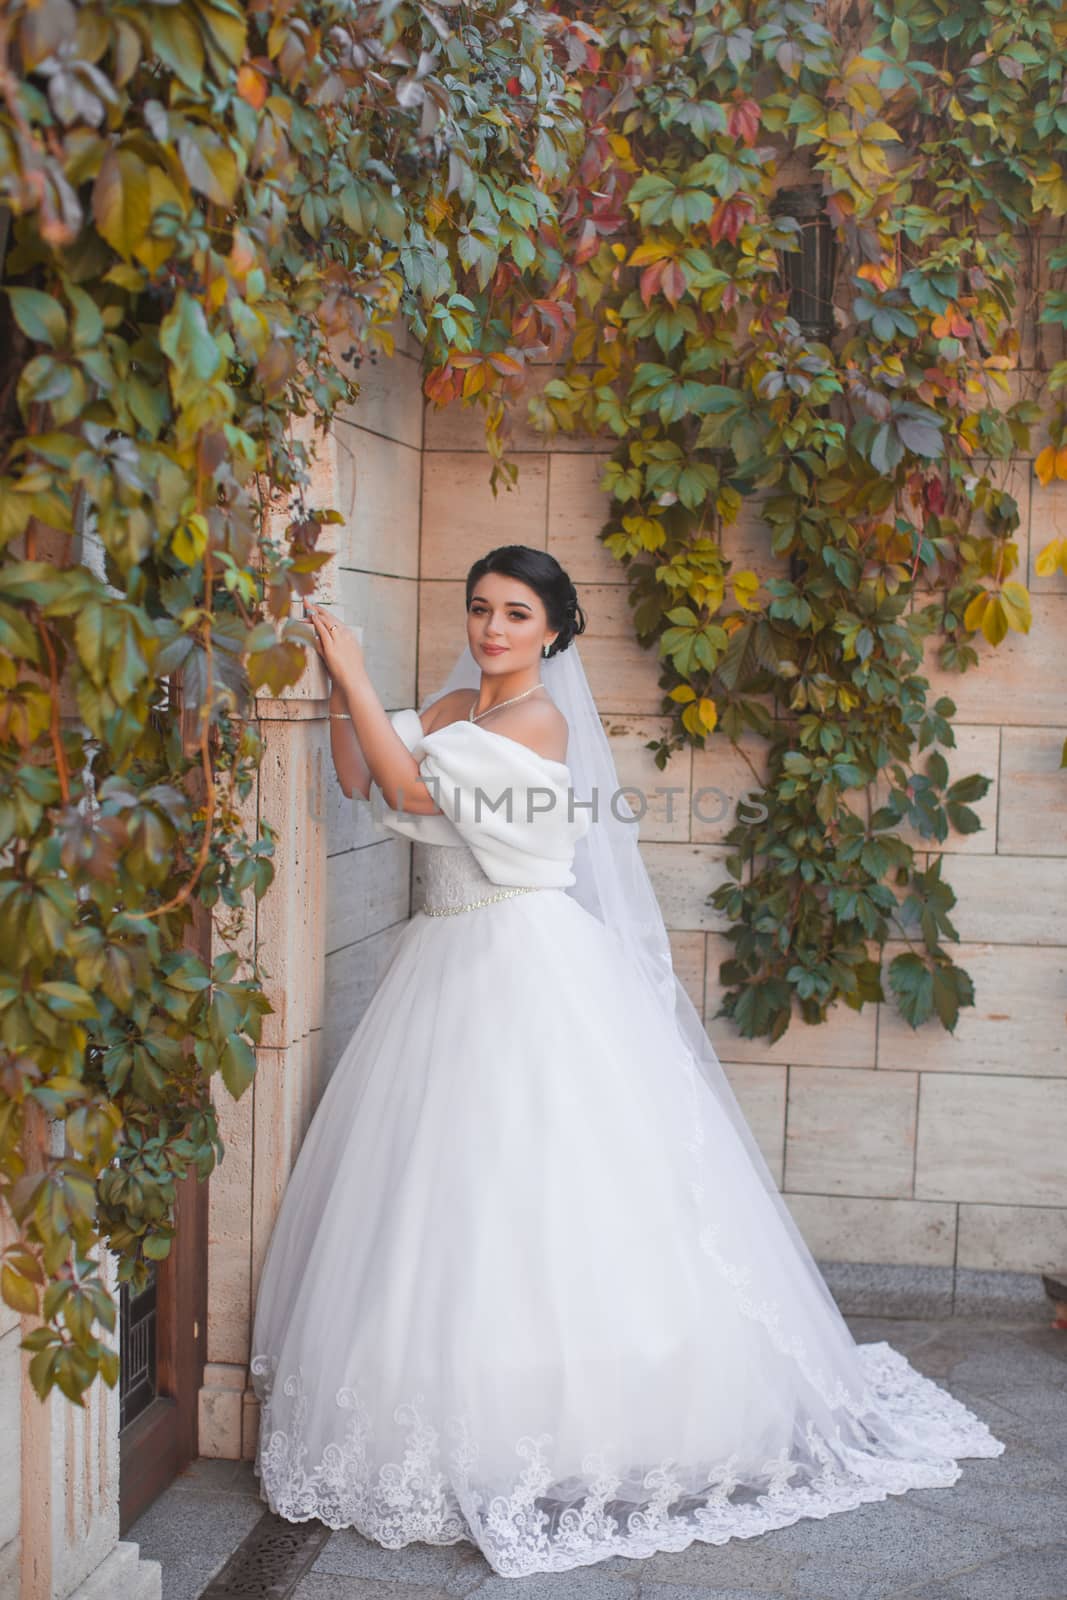 Stylish bride stands by the brick wall, posing on the photo